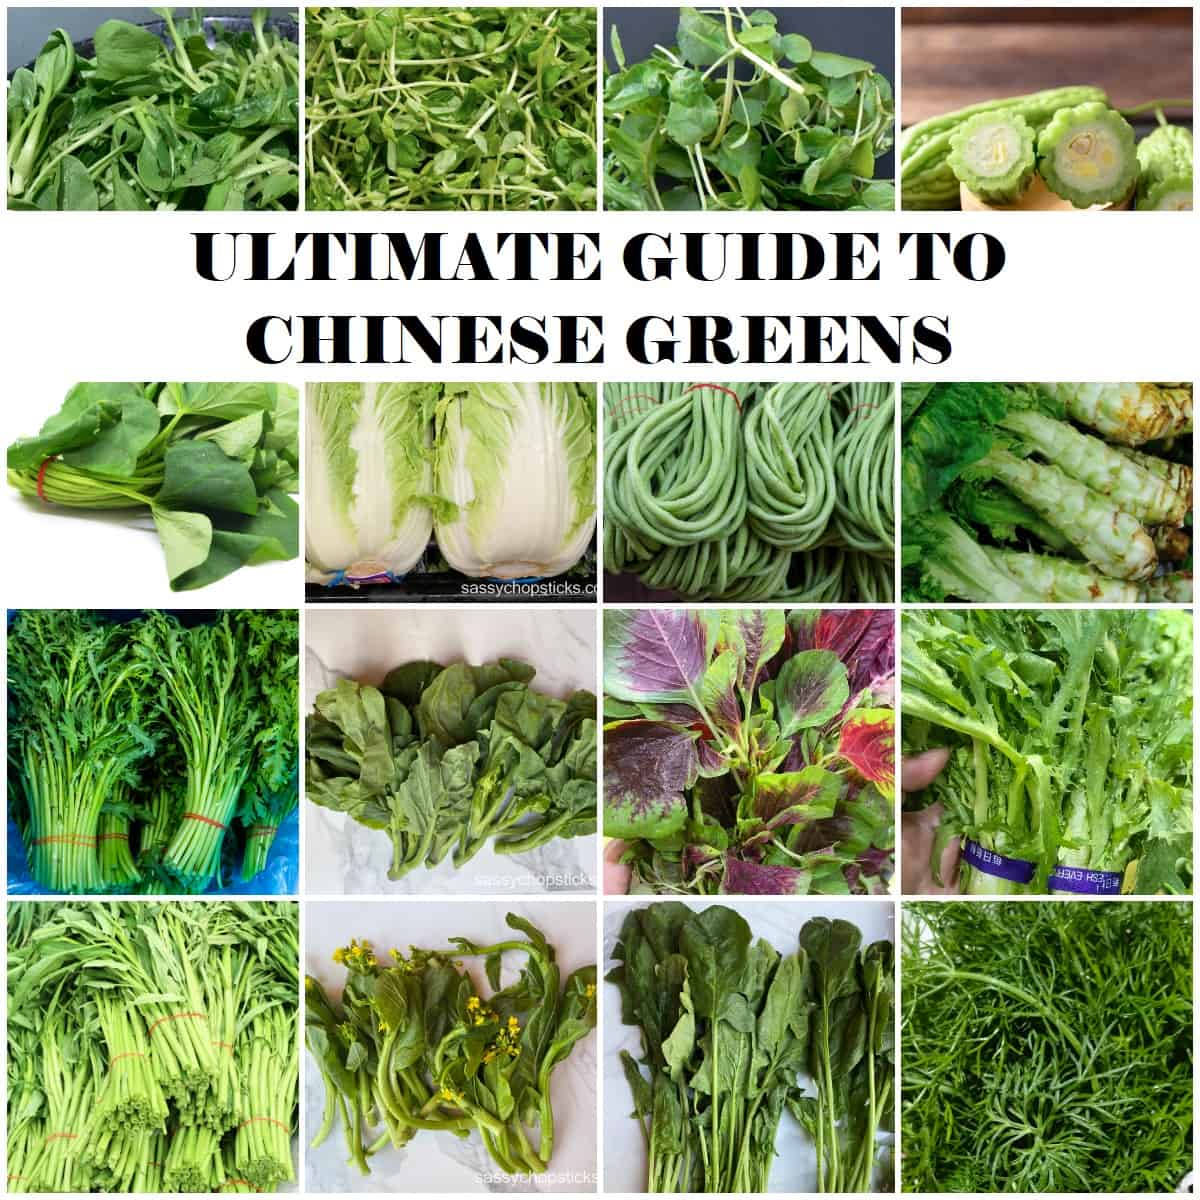 Ultimate Guide To Chinese Greens Sassy Chopsticks